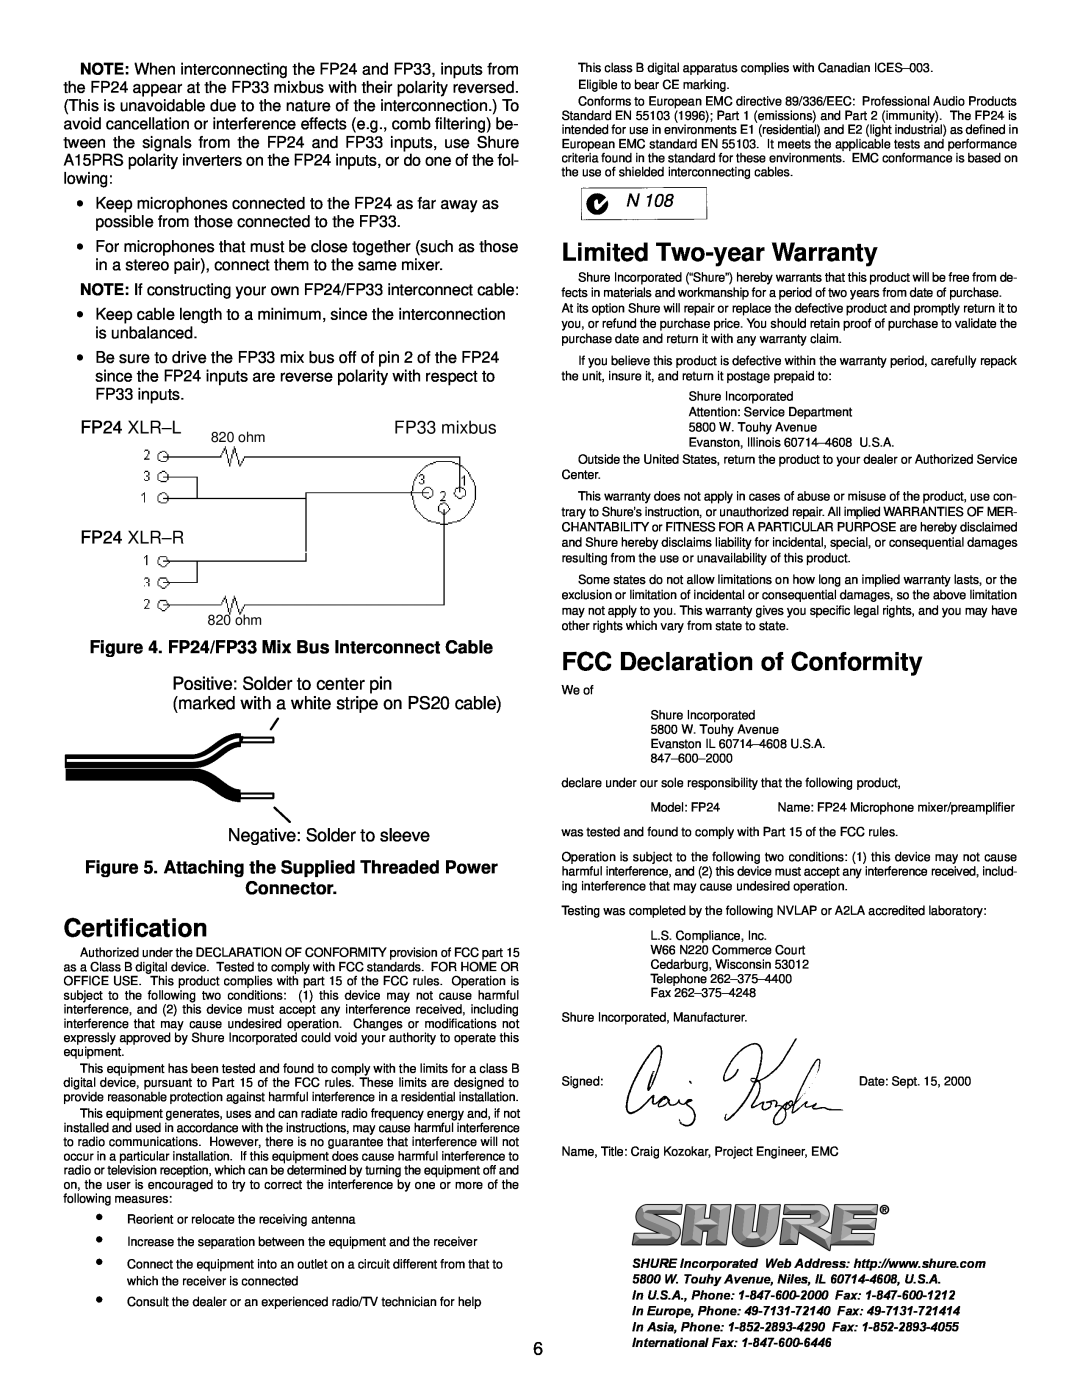 Shure Limited Two-year Warranty, Certification, FCC Declaration of Conformity, FP24/FP33 Mix Bus Interconnect Cable 